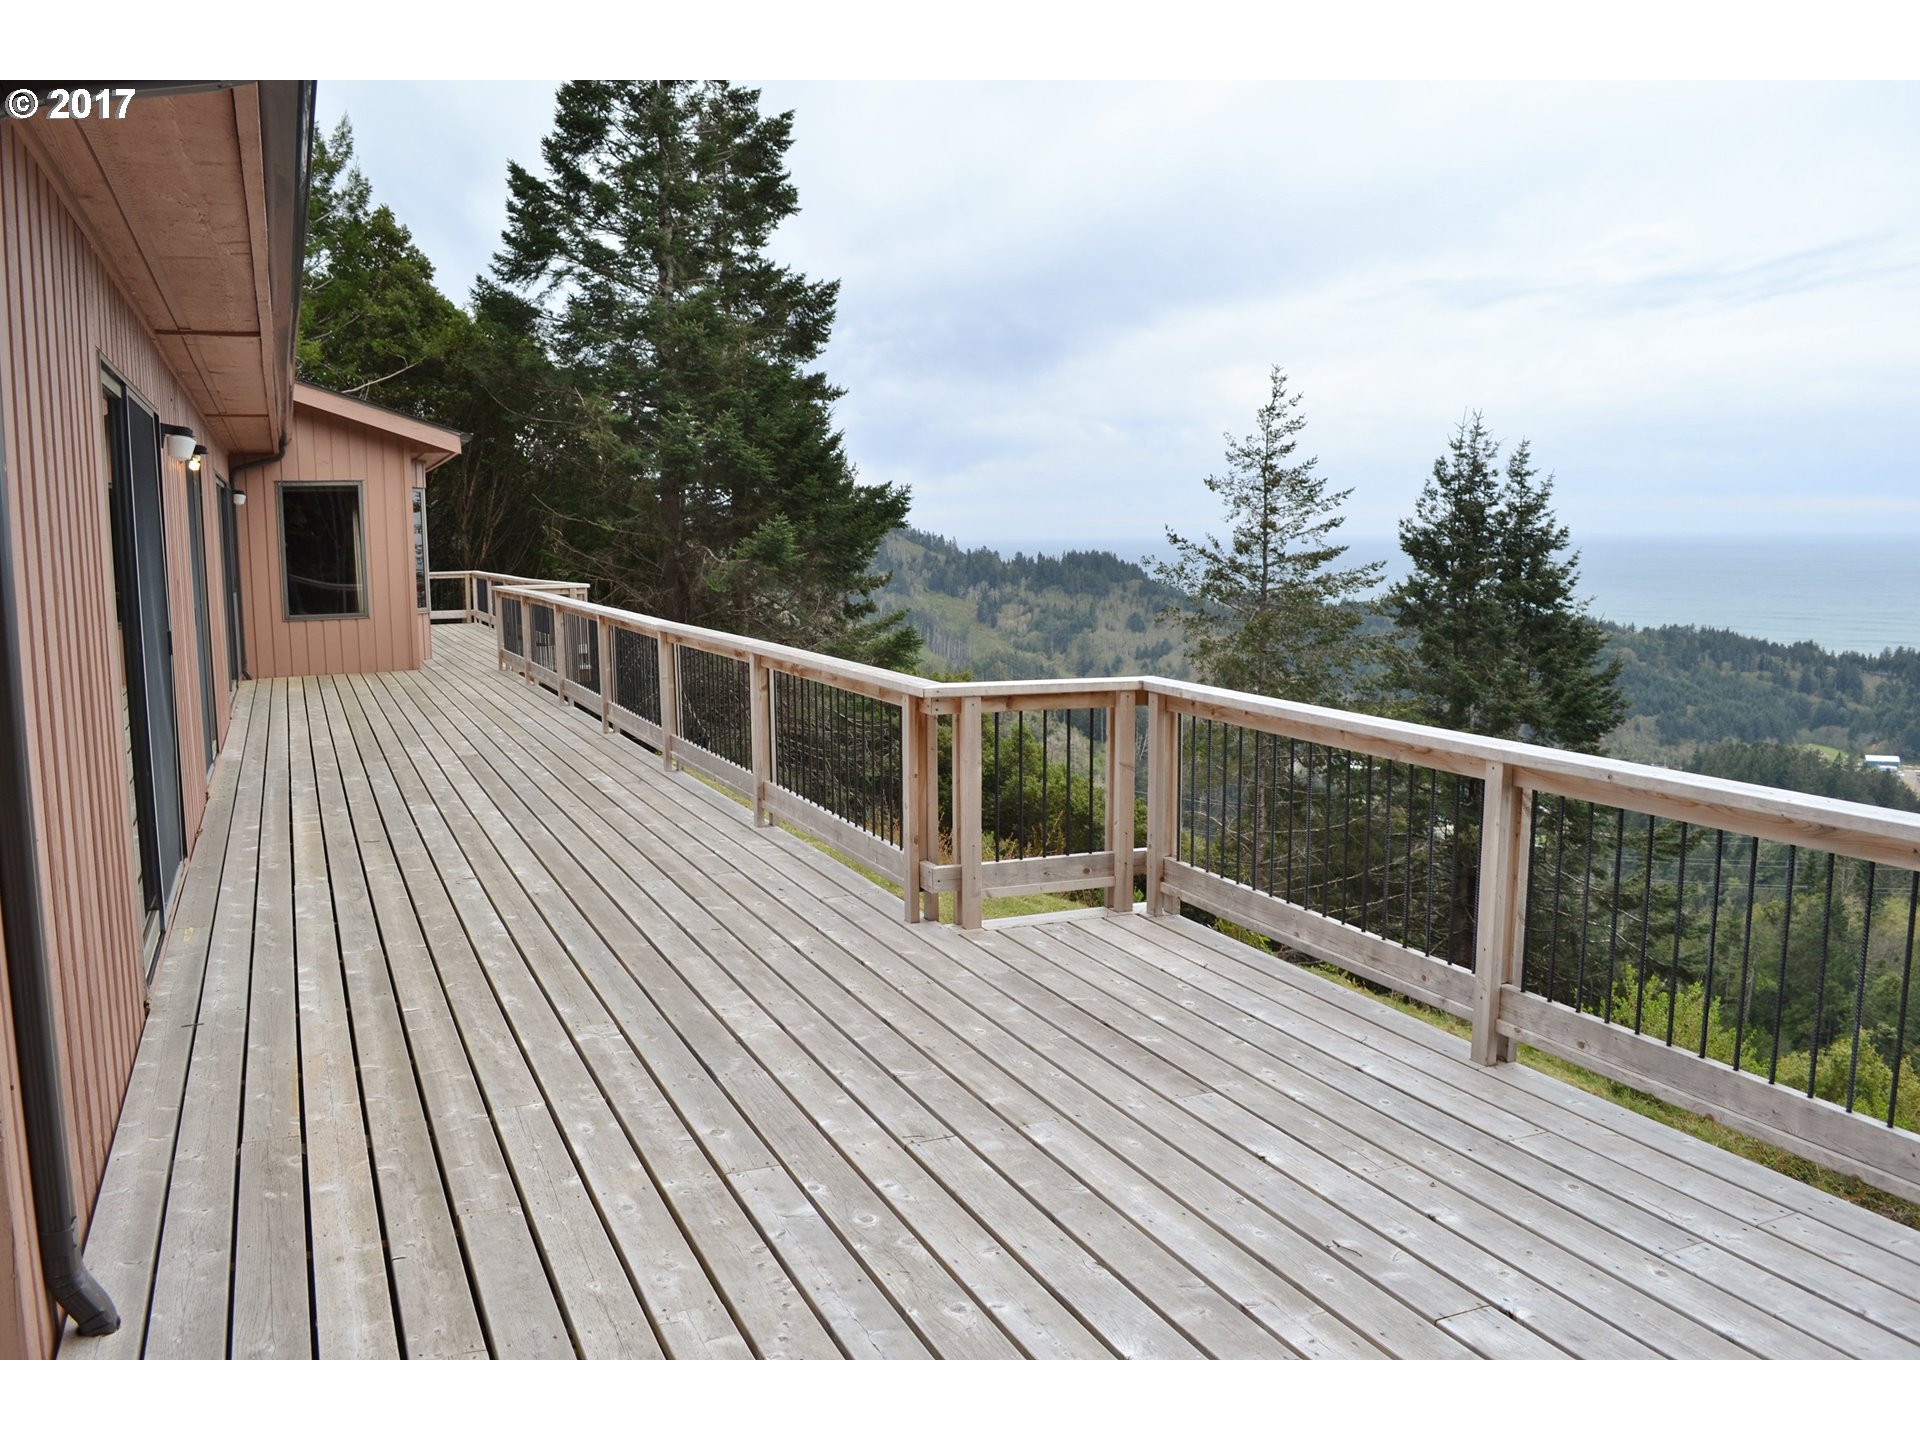 28492 EMERALD DR Gold Beach, Brookings Home Listings - Pacific Coastal Real Estate